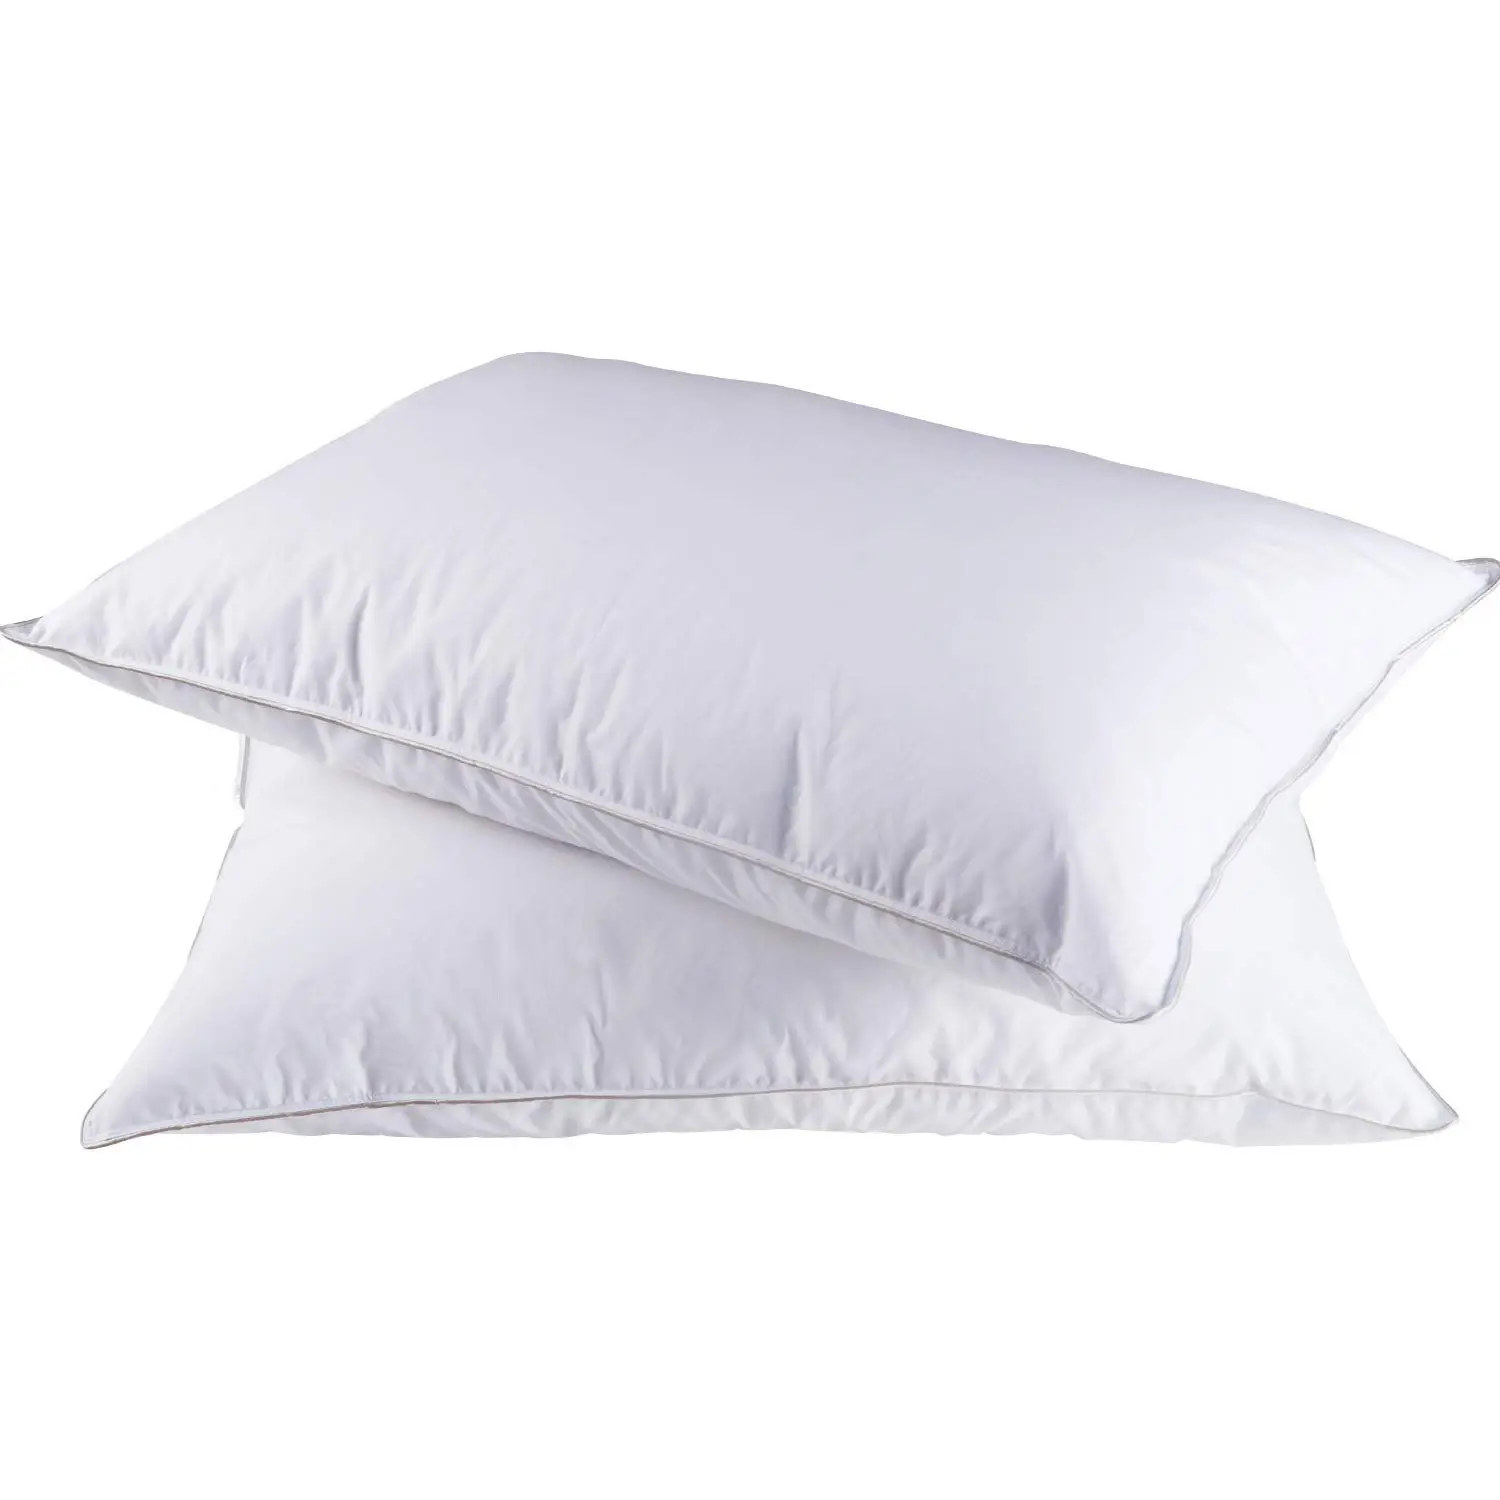 Wholesale hilton pillow hotel goose down feather pillow sleep for home hotel